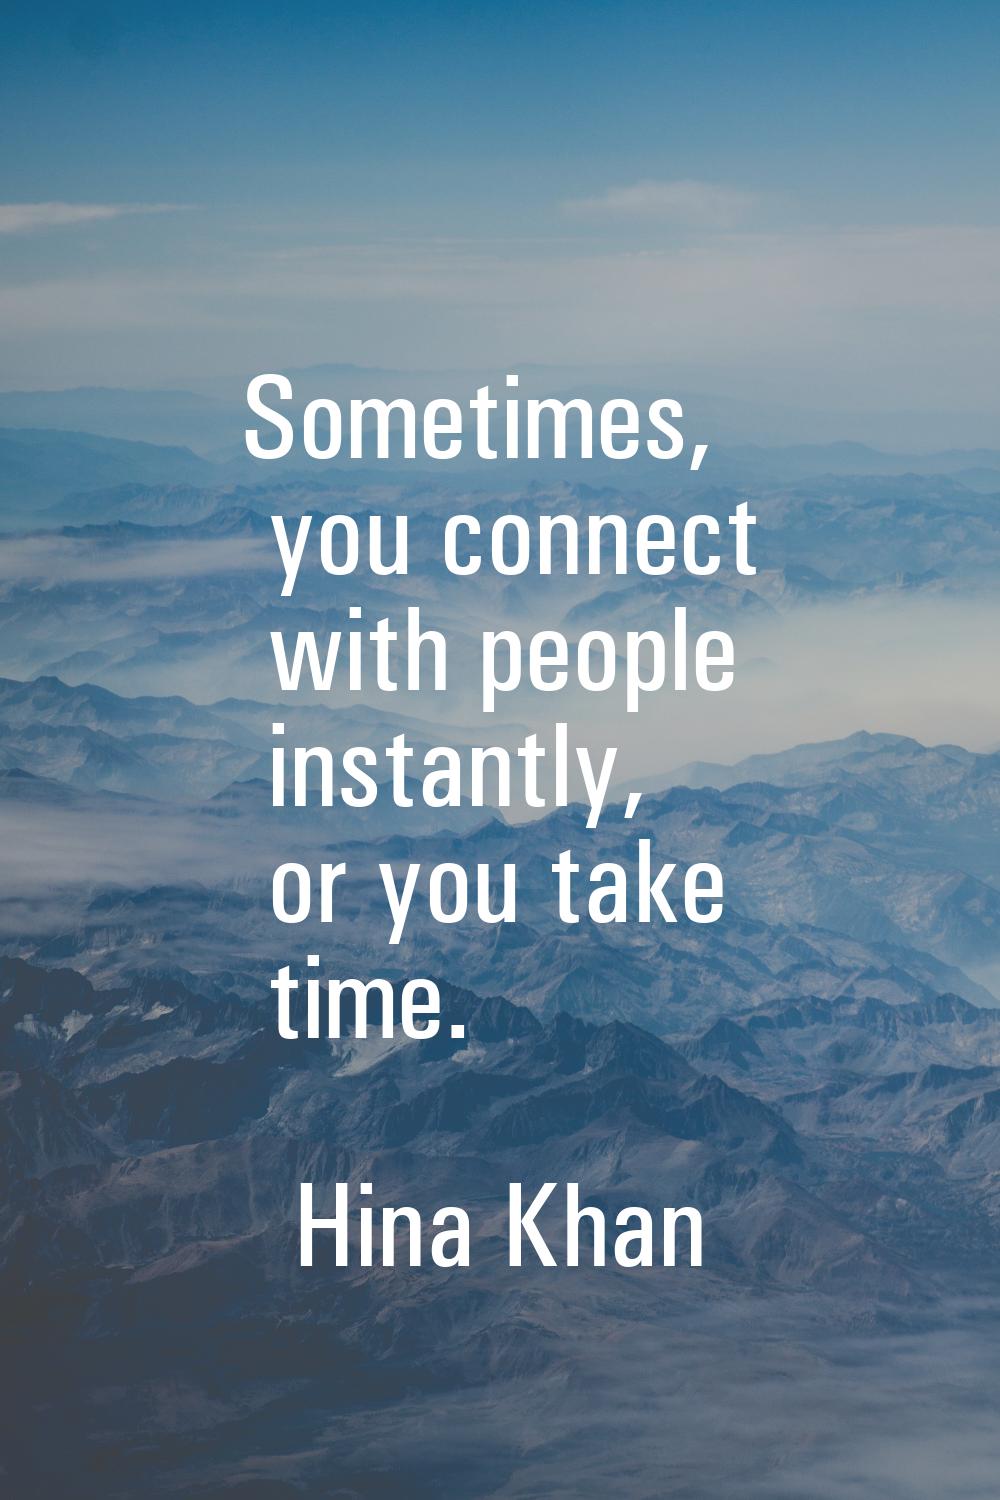 Sometimes, you connect with people instantly, or you take time.